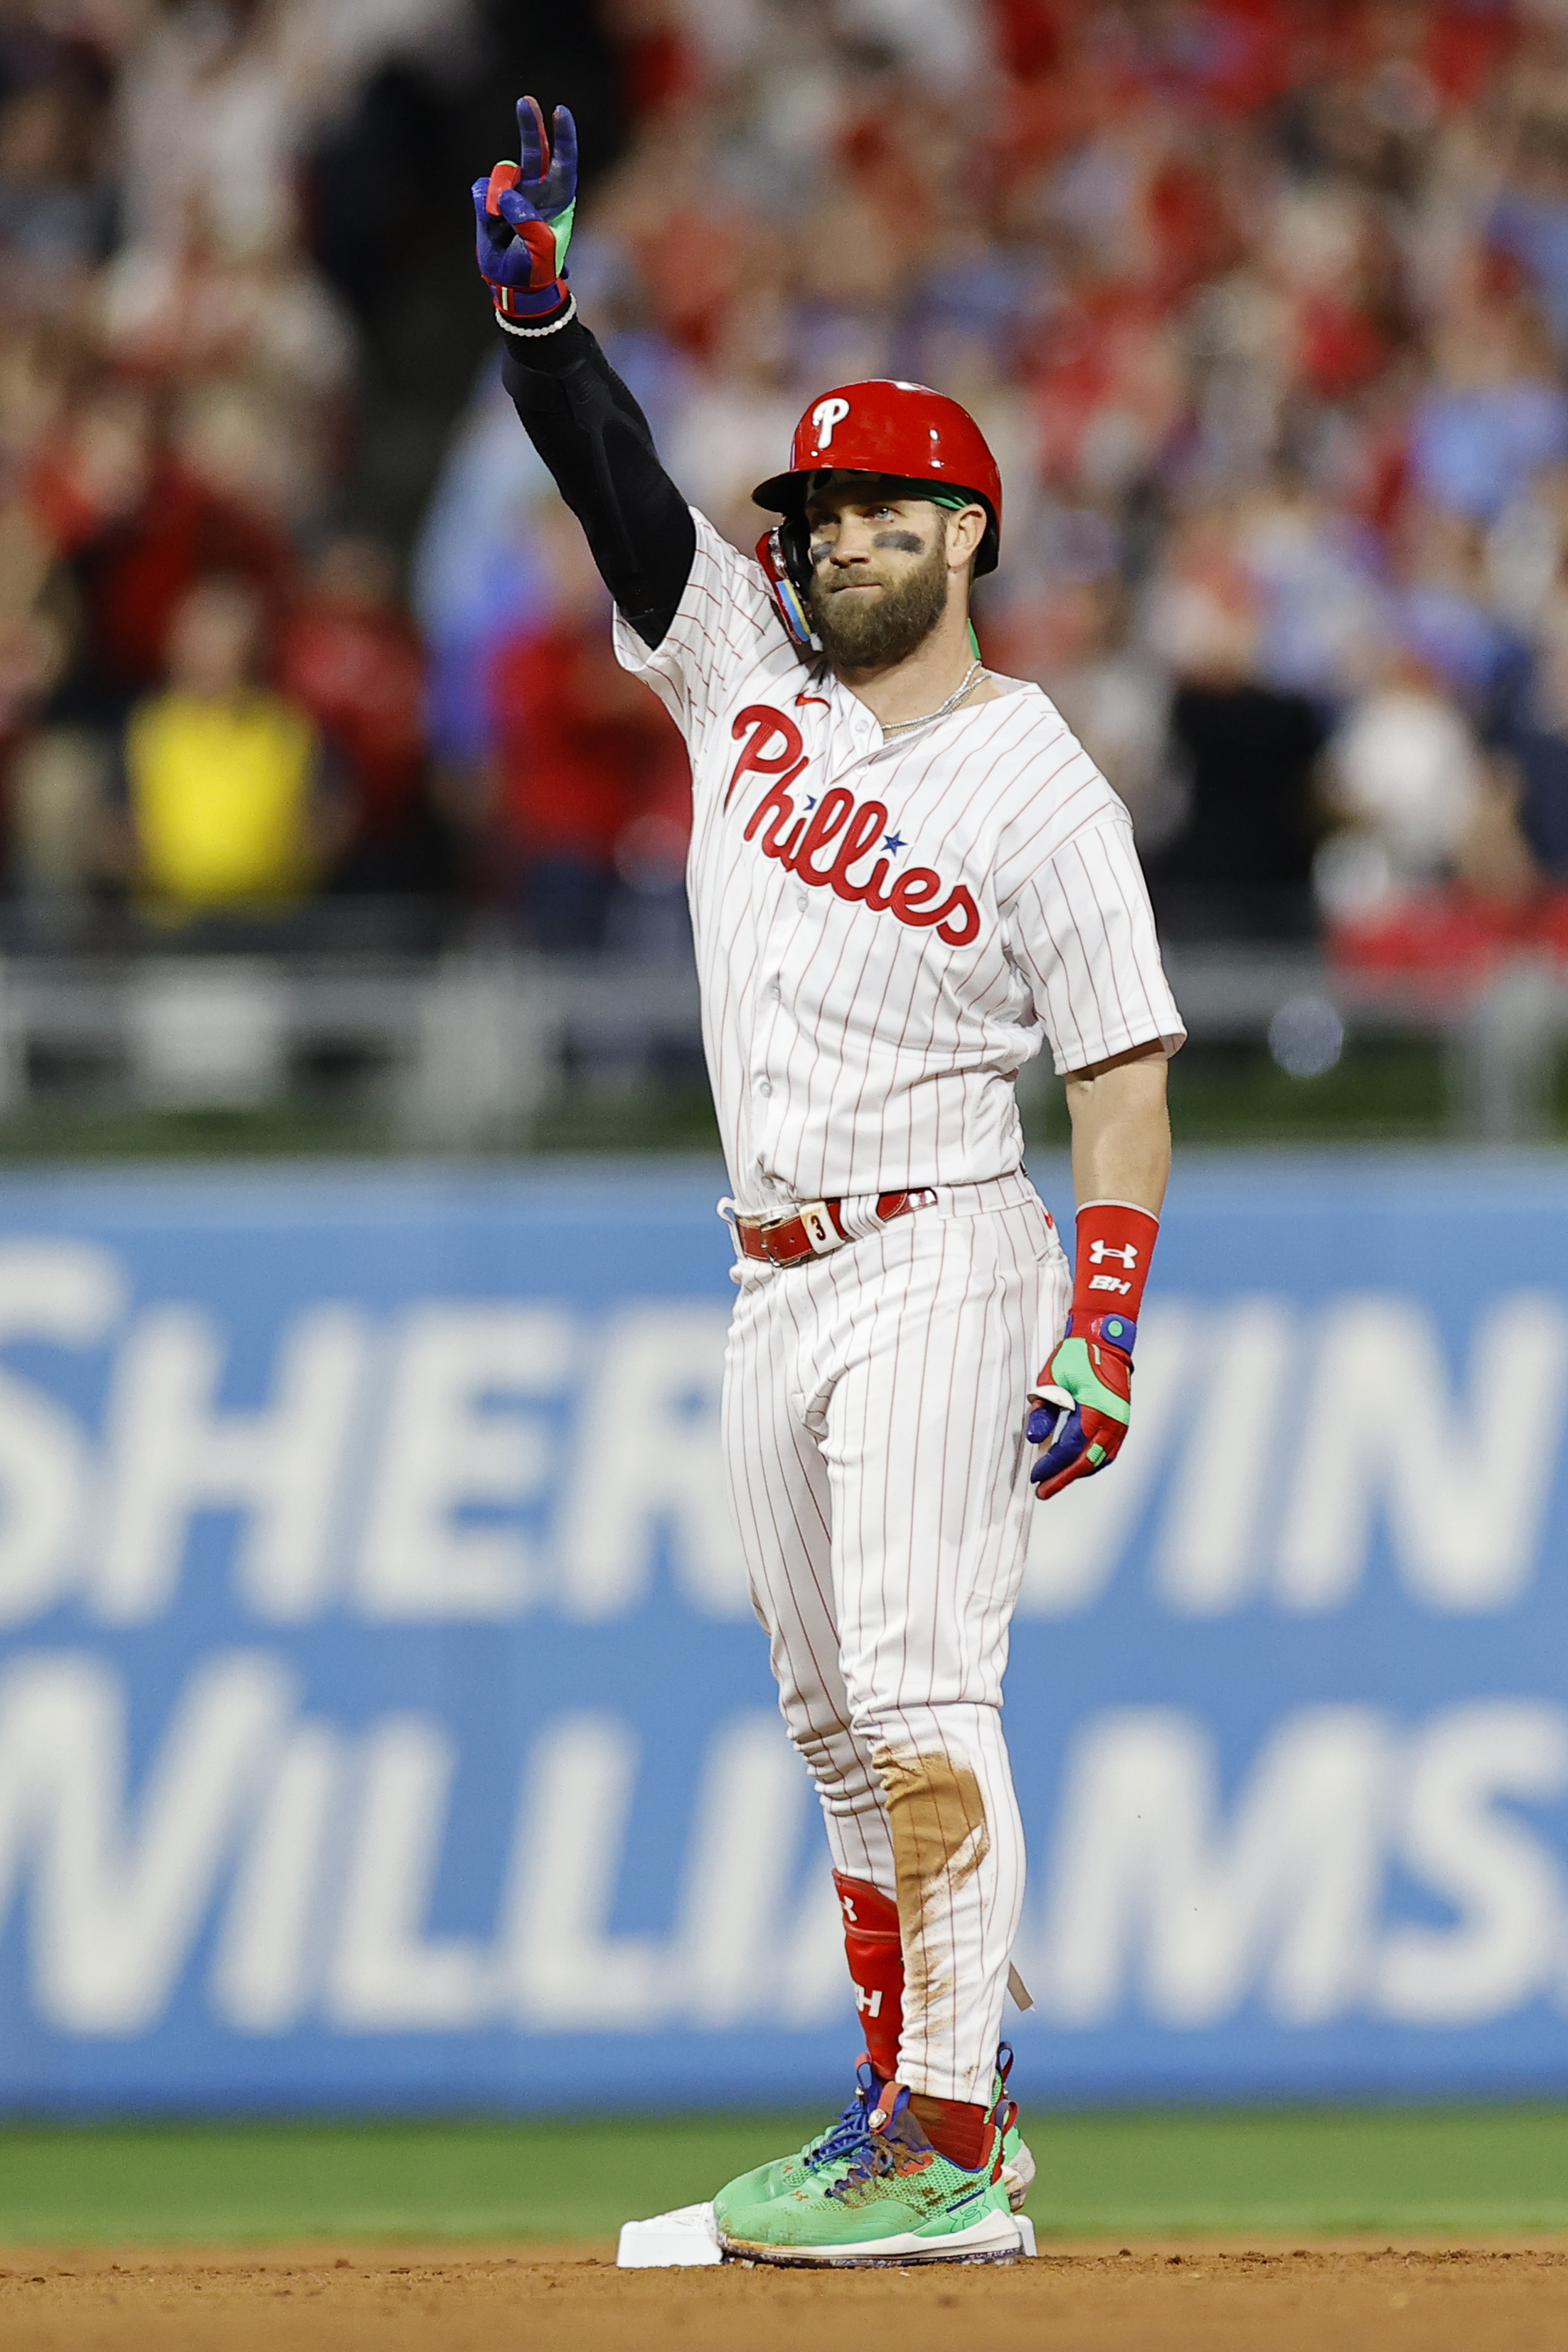 Same Phillies, new era: How Aaron Nola, Rhys Hoskins and Bryce Harper  emphatically turned the page in Game 3 win